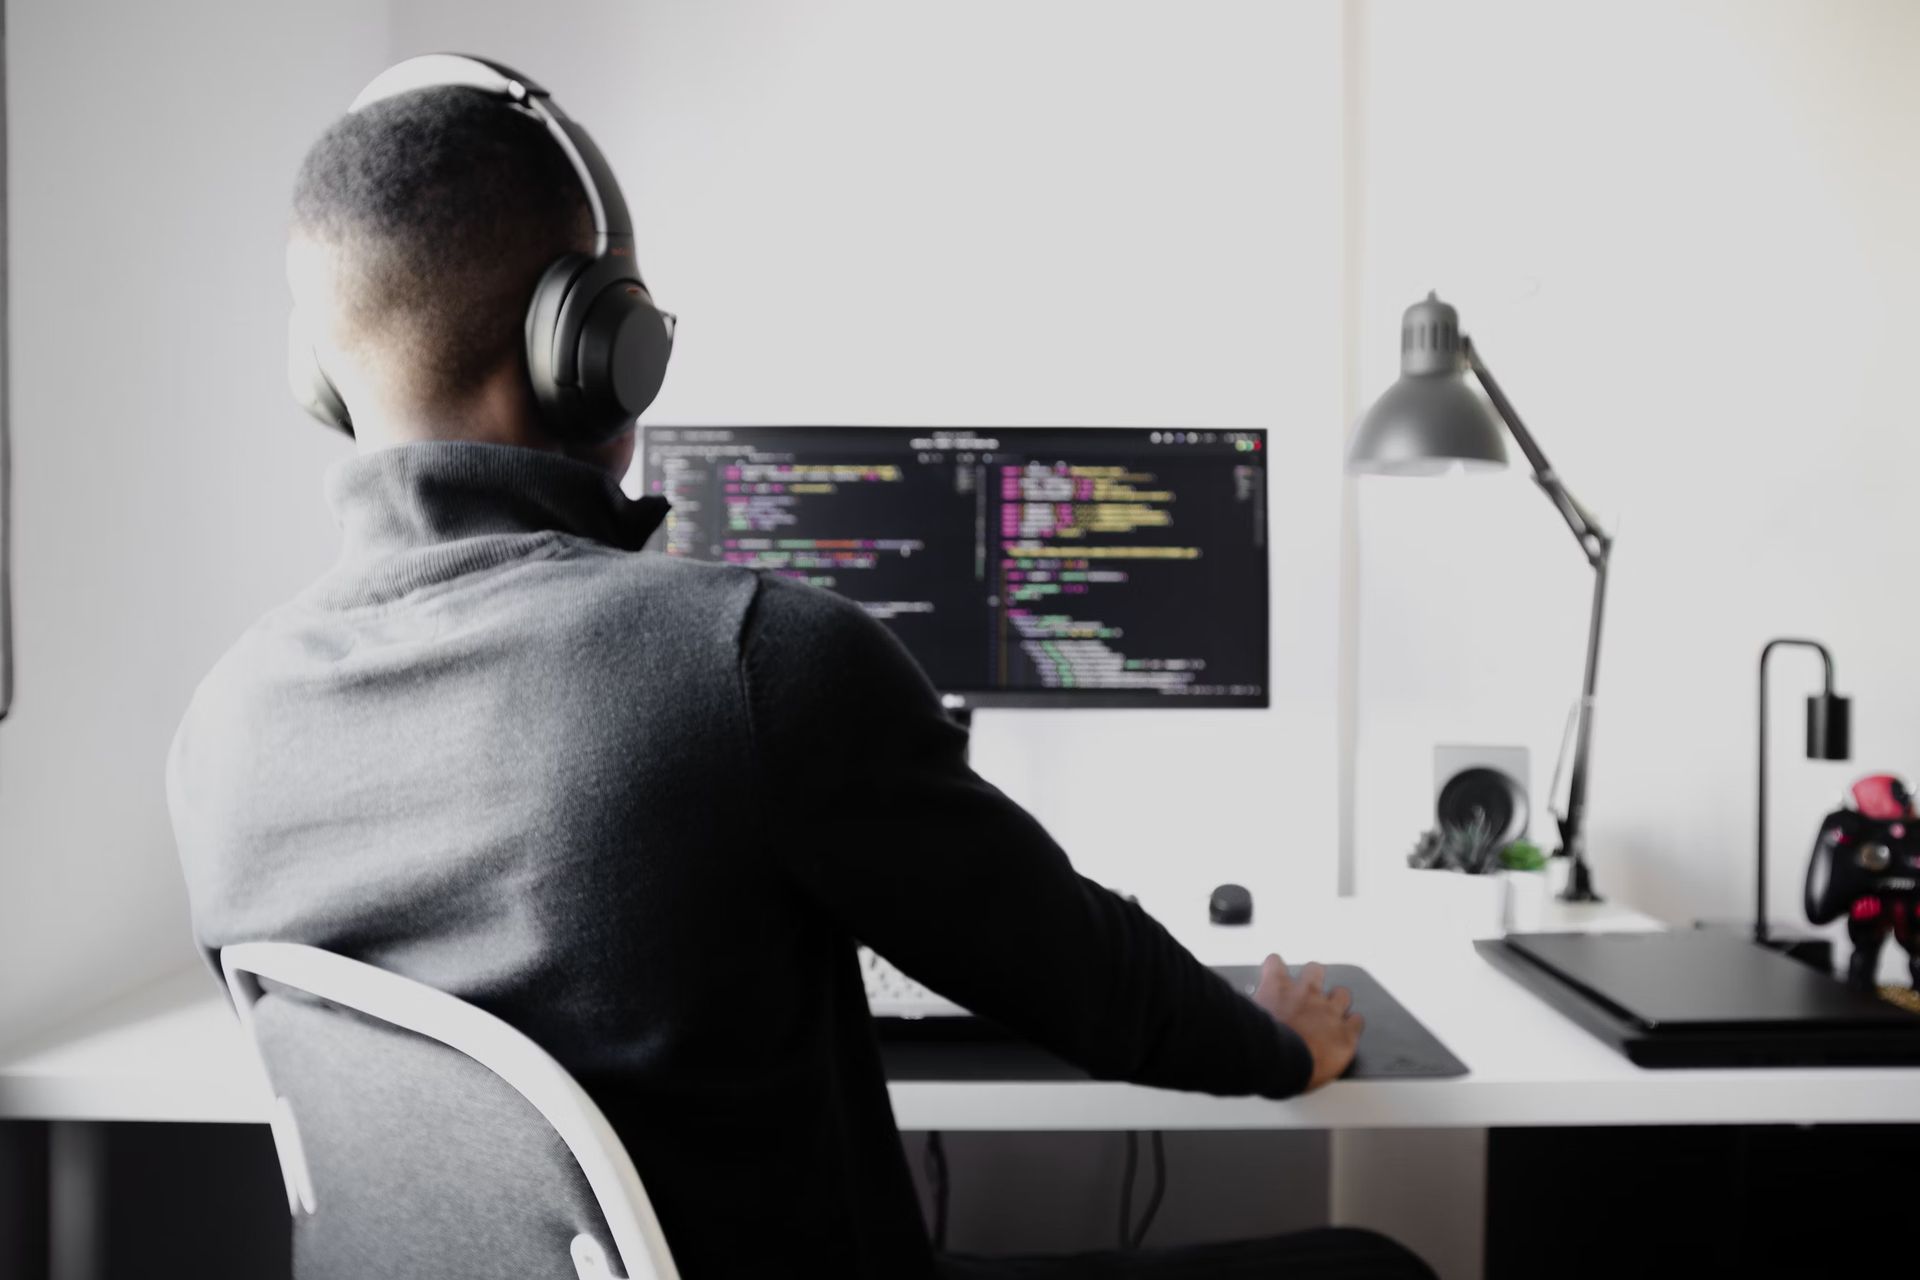 9 crucial factors for choosing where to hire developers